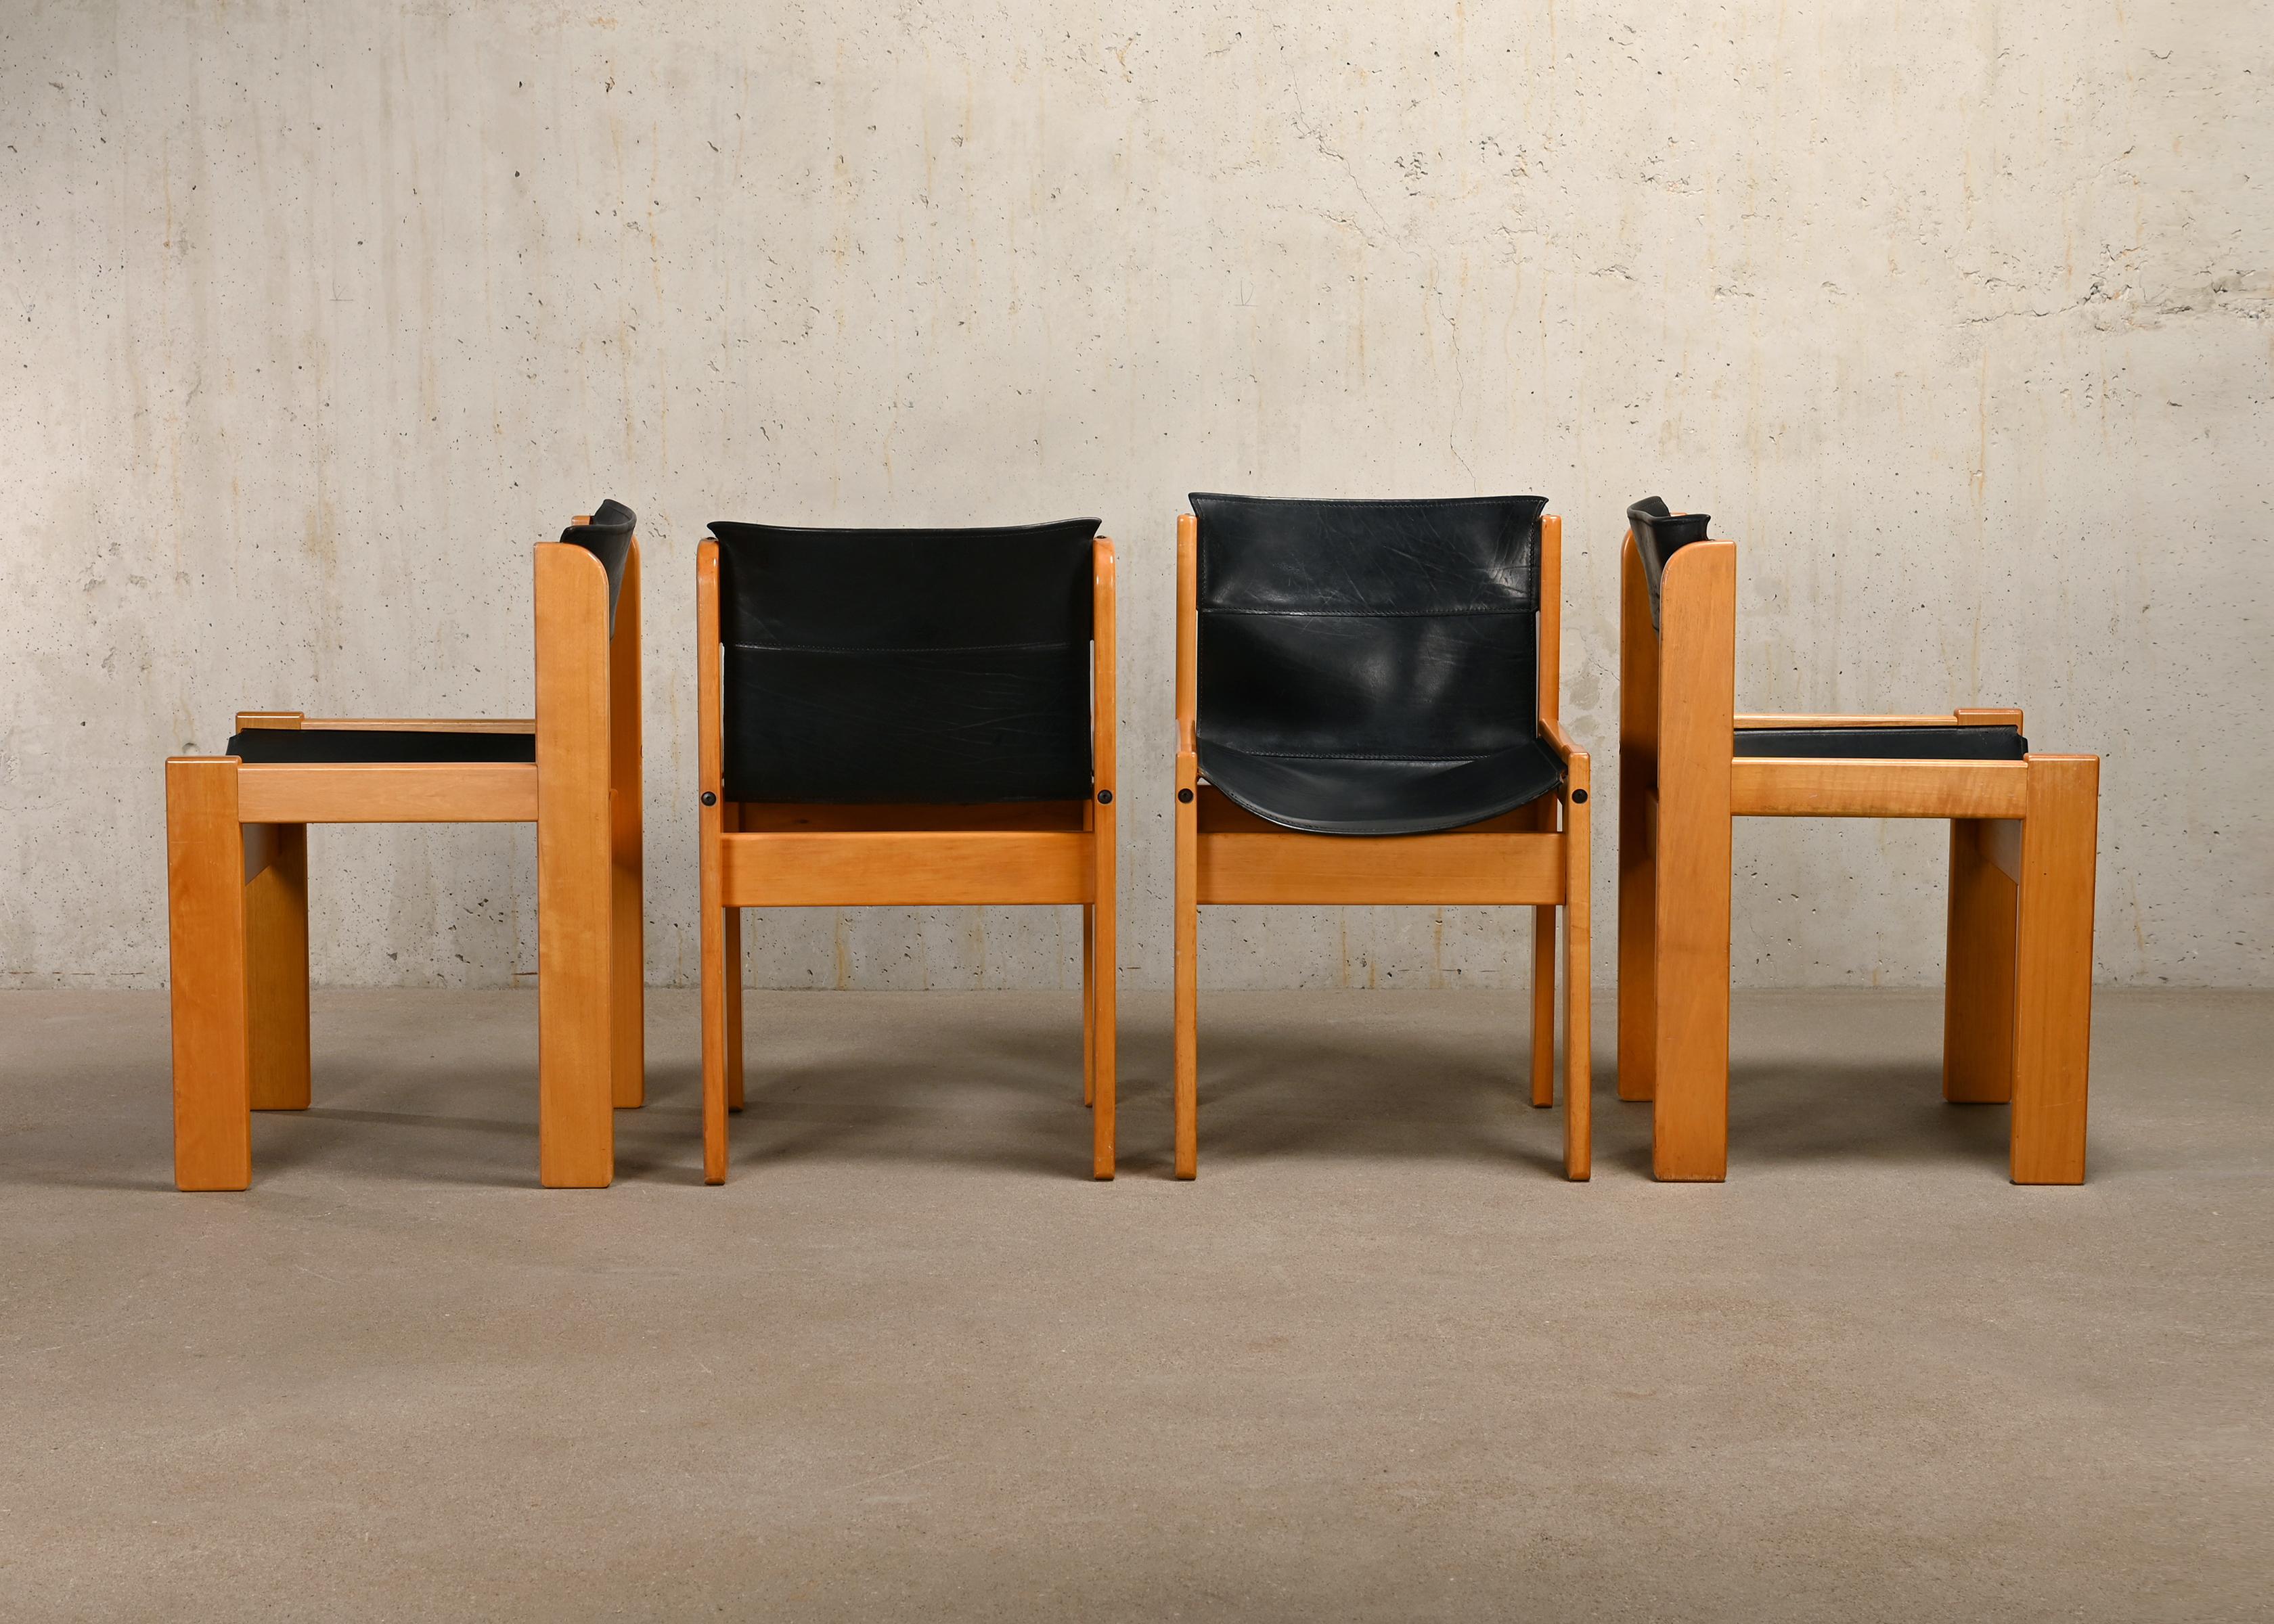 Nice set of 4 Italian dining chairs from Ibisco with Beech wooden frames and black saddle leather. The design has similarities with the Monk chair from Afra & Tobia Scarpa.
The chairs are in good vintage and sturdy condition with normal signs of